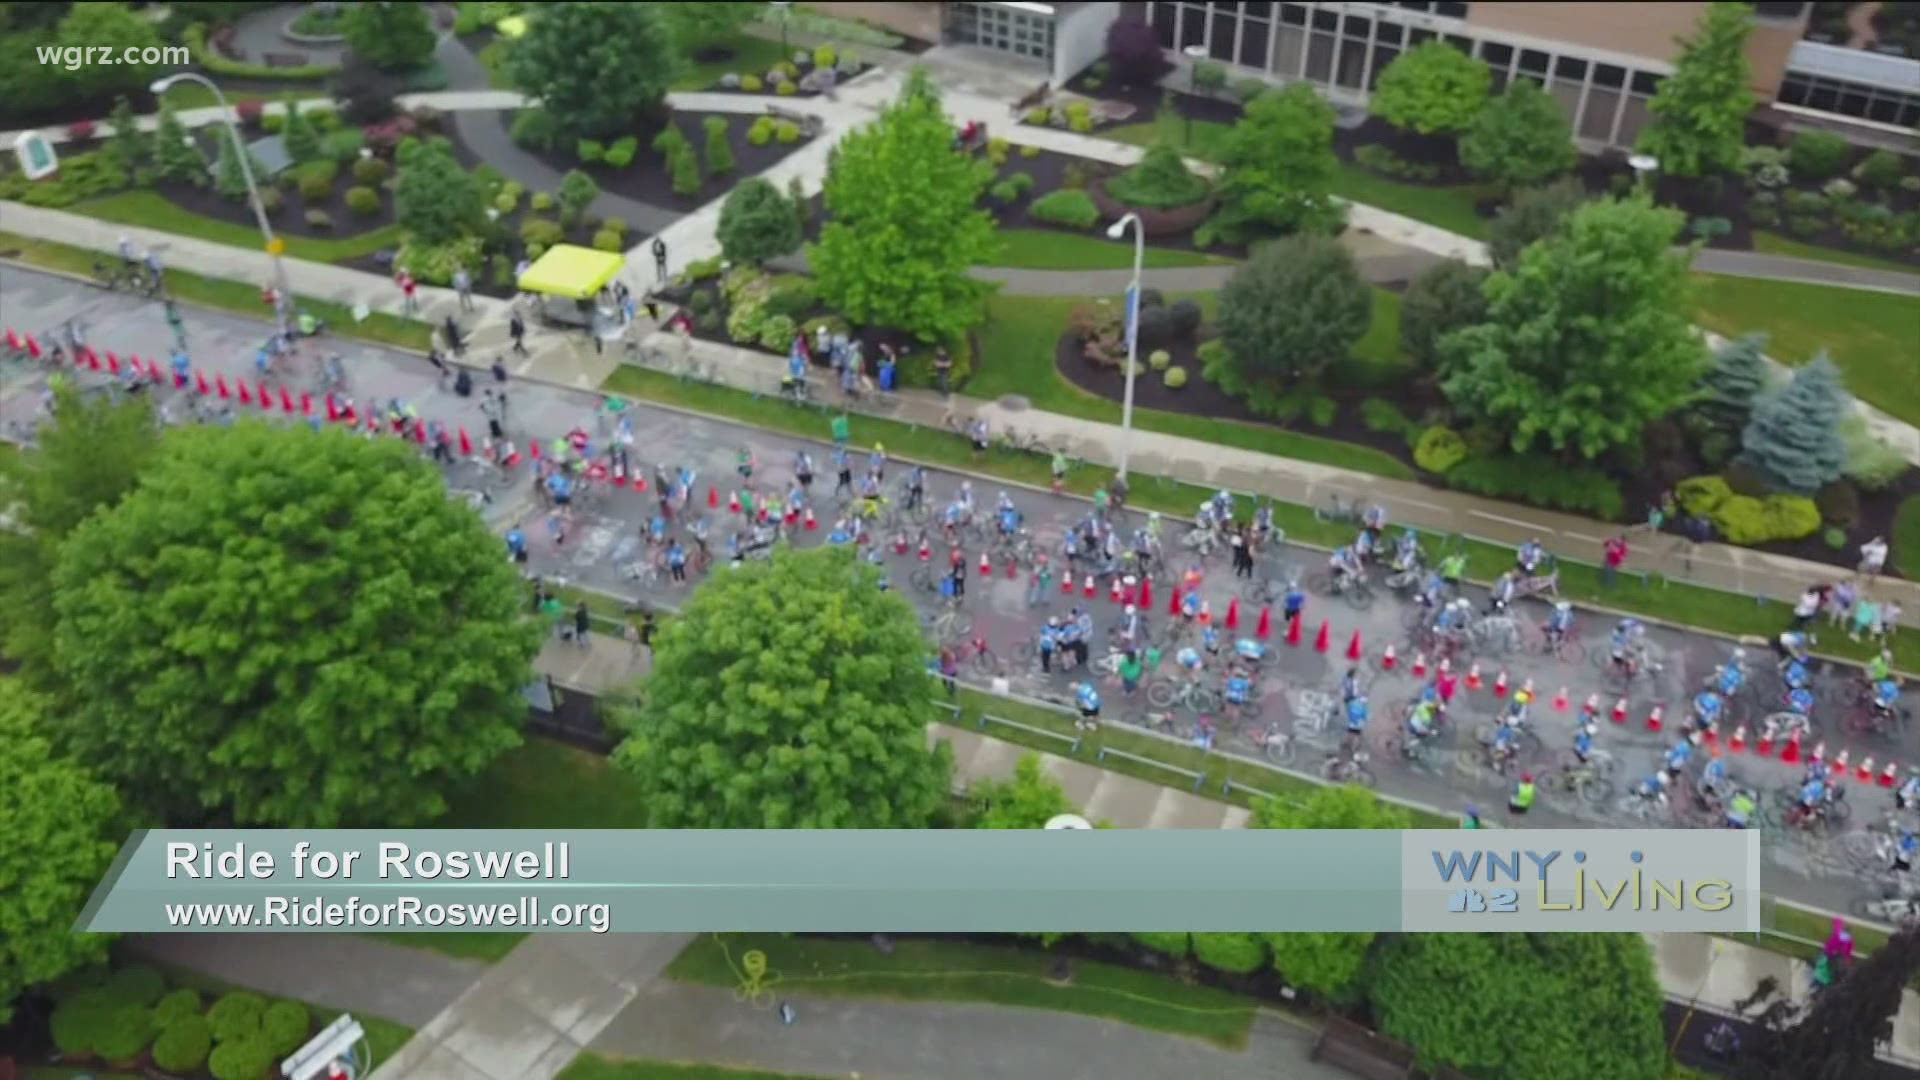 WNY Living - June 19 - Ride for Roswell (THIS VIDEO IS SPONSORED BY THE RIDE FOR ROSWELL)